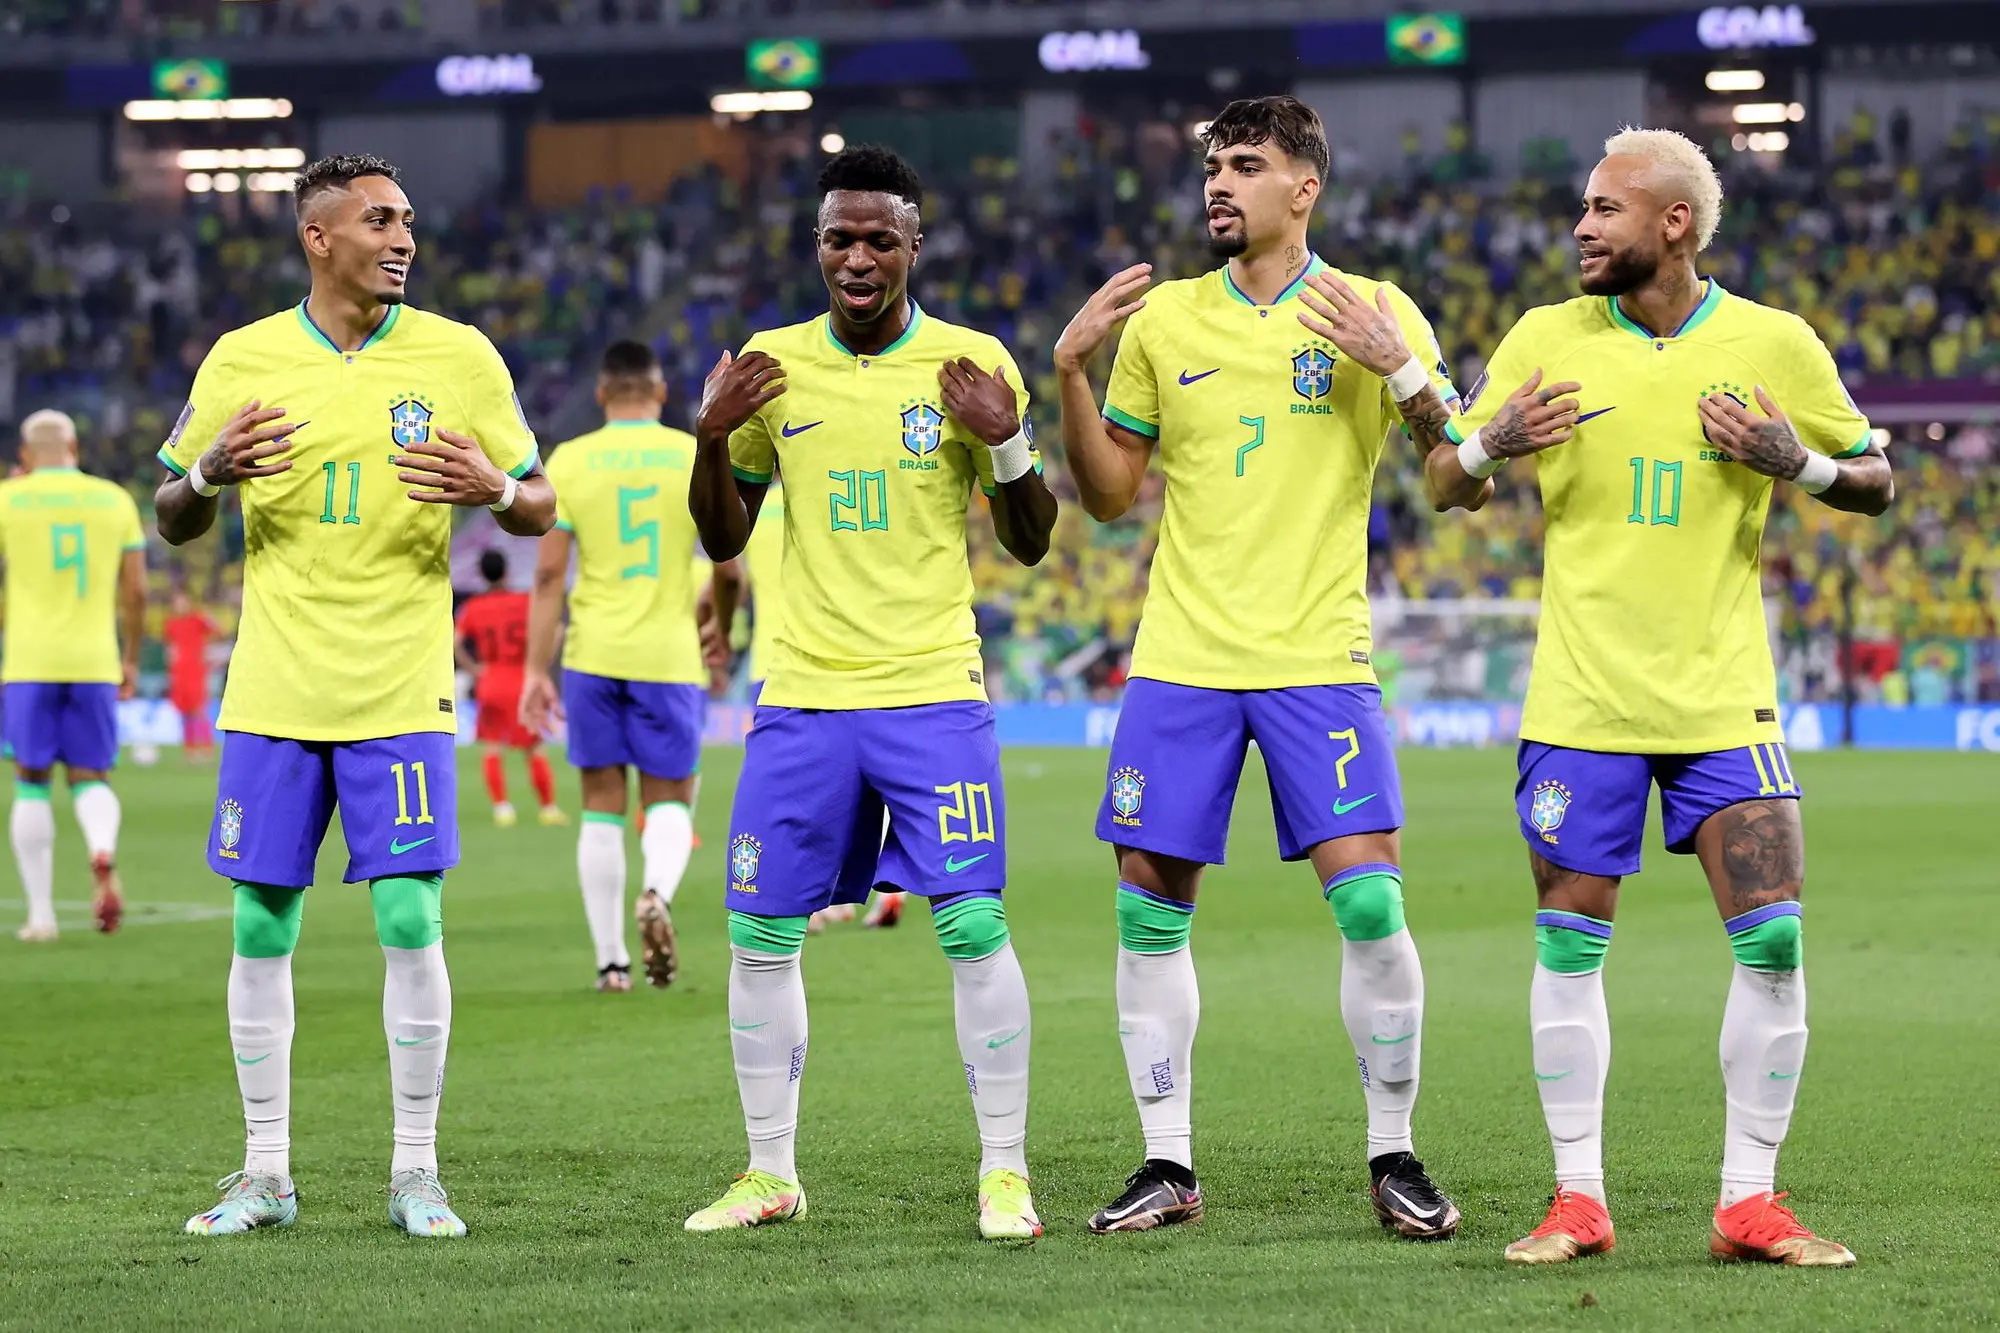 epa10350415 Vinicius Junior of Brazil (2L) celebrates Raphinha (L), Lucas Paqueta (2R) and Neymar (R) after scoring the 1-0 during the FIFA World Cup 2022 round of 16 soccer match between Brazil and South Korea at Stadium 974 in Doha, Qatar, 05 December 2022. EPA/Abedin Taherkenareh